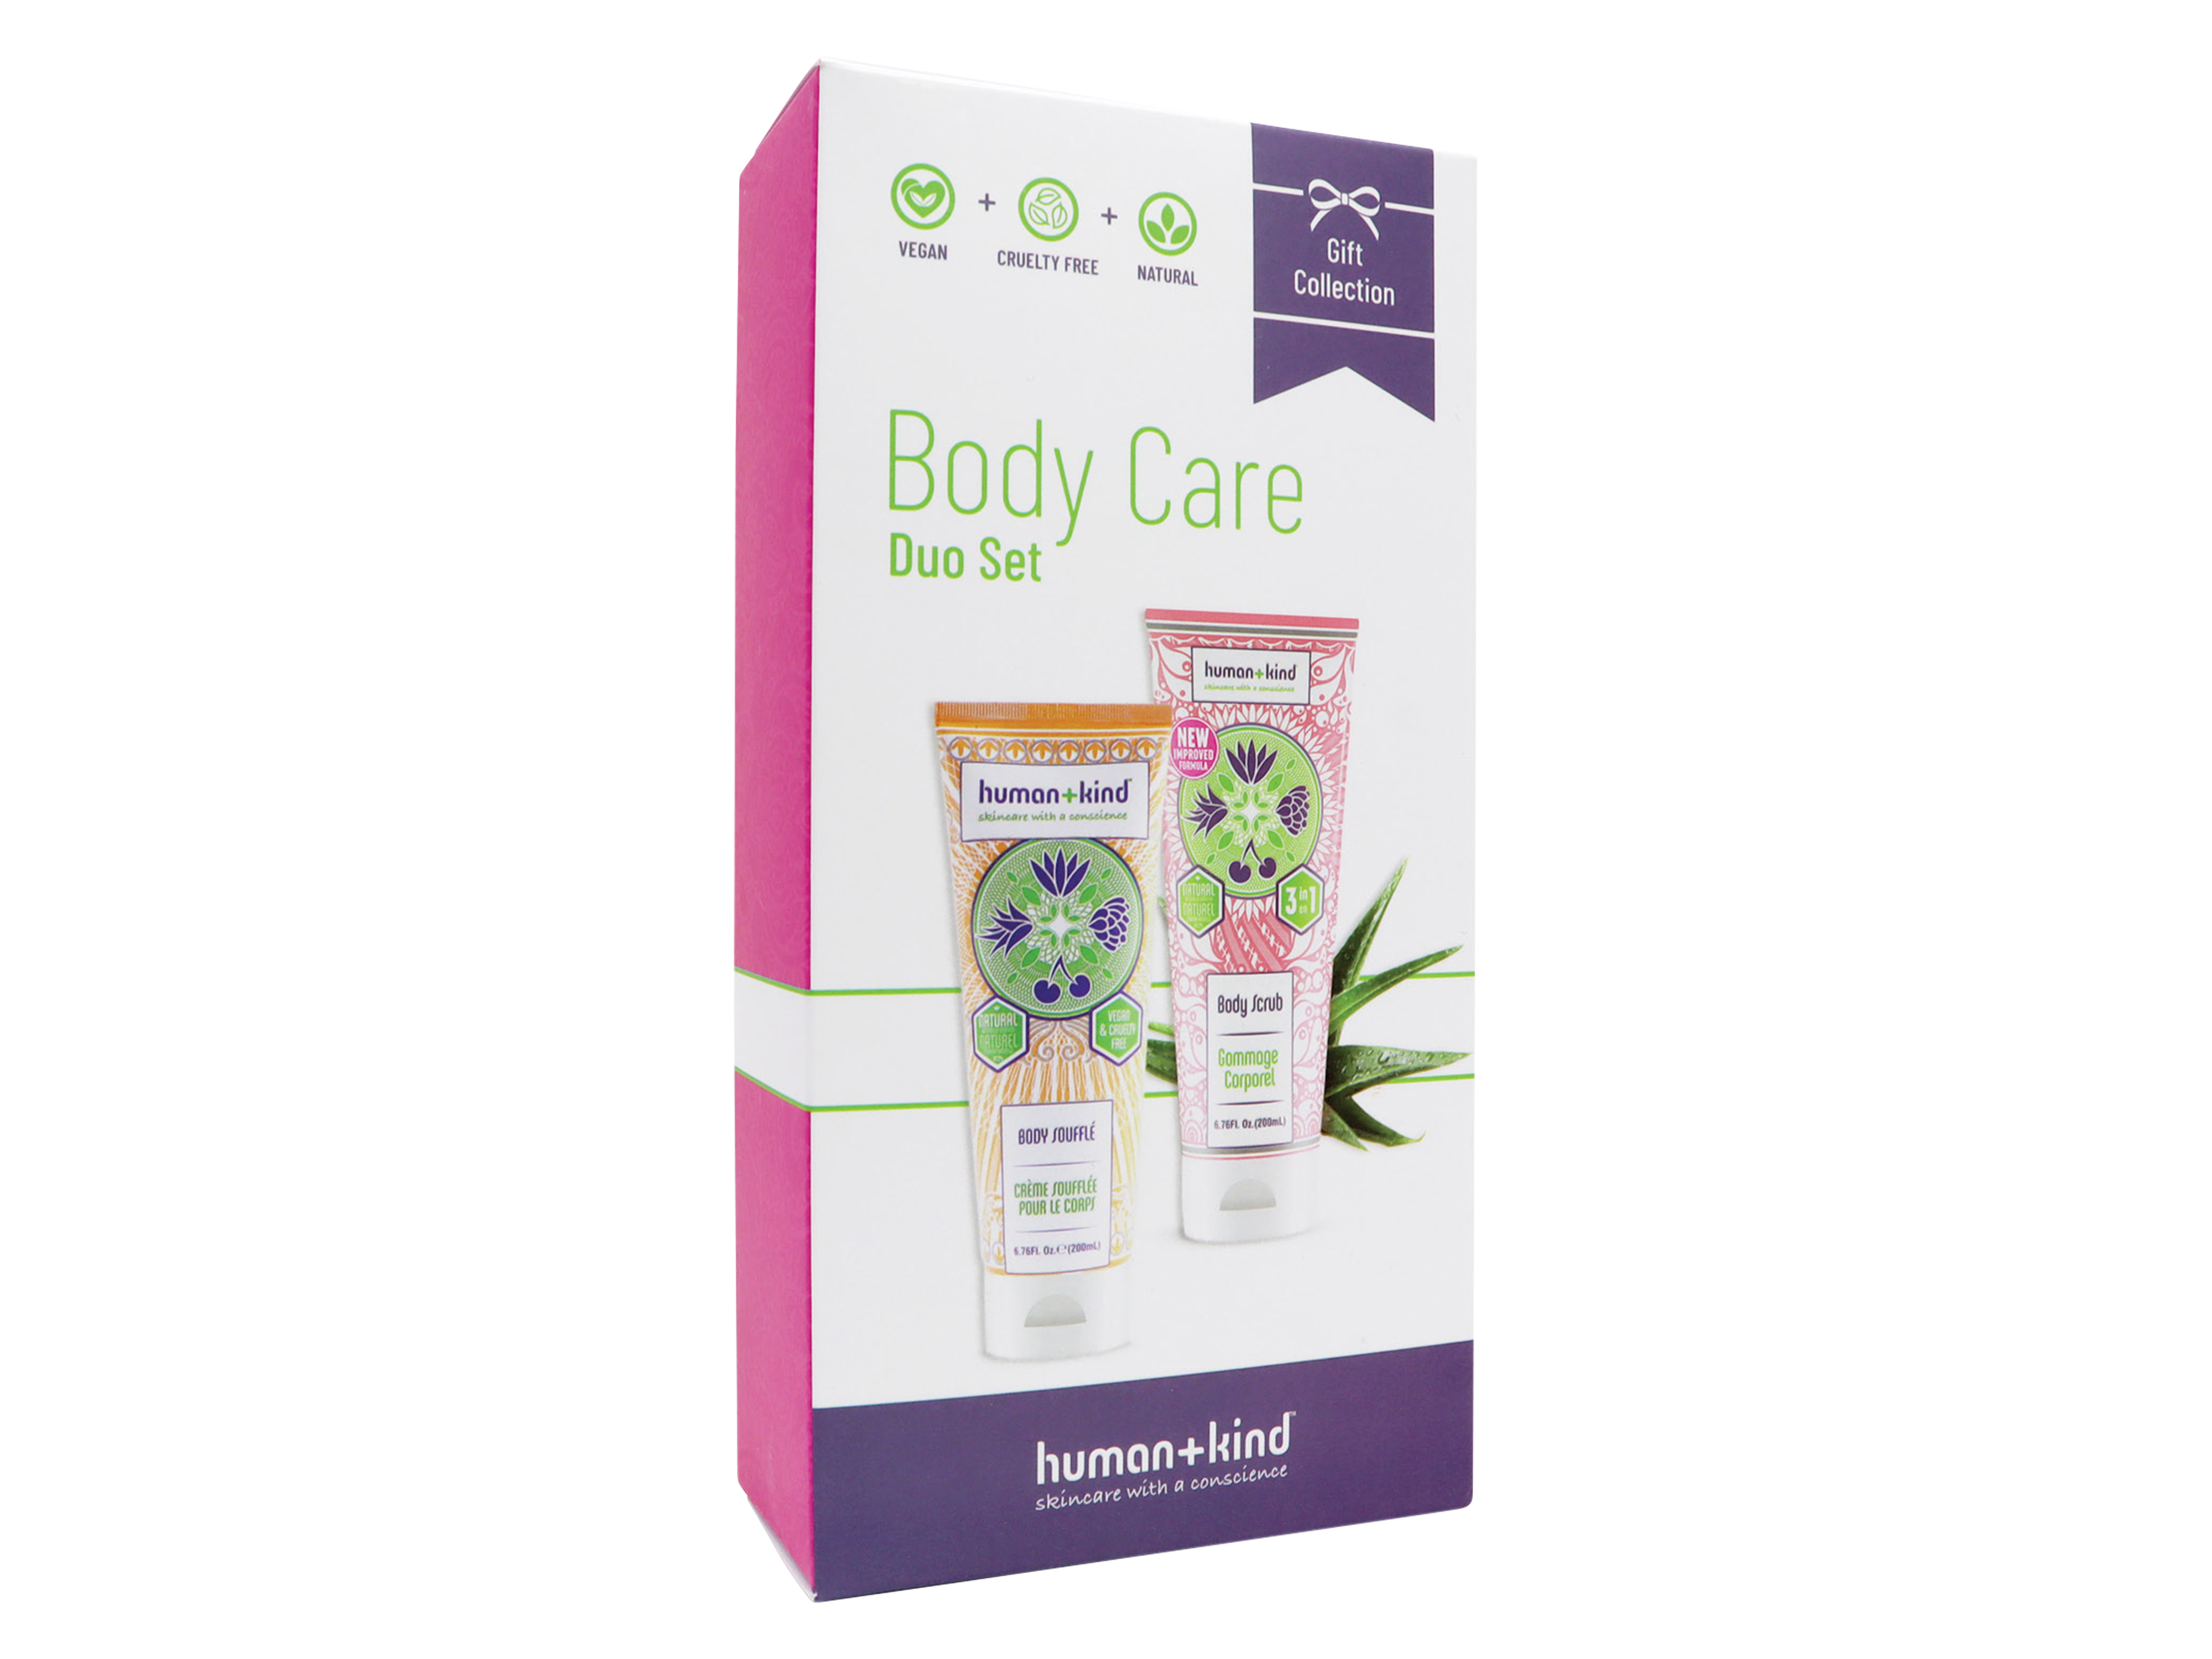 Human+Kind The Body Care Duo Gave, 1 sett